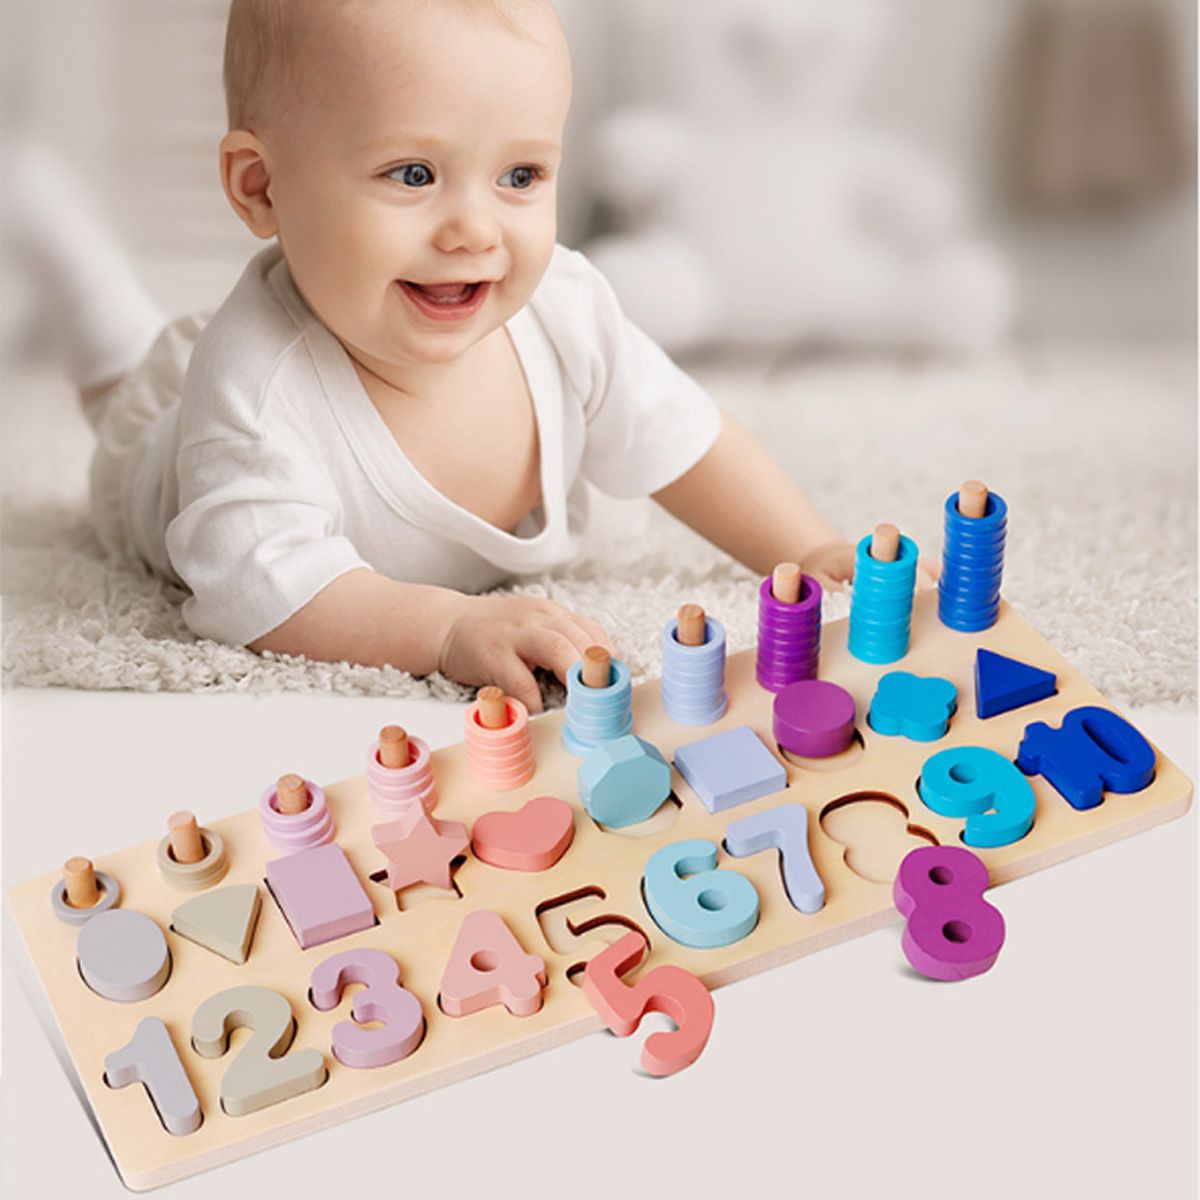 Wooden-Toys-Rings-Montessori-Math-Toys-Counting-Board-Preschool-Learning-Gifts-1479055